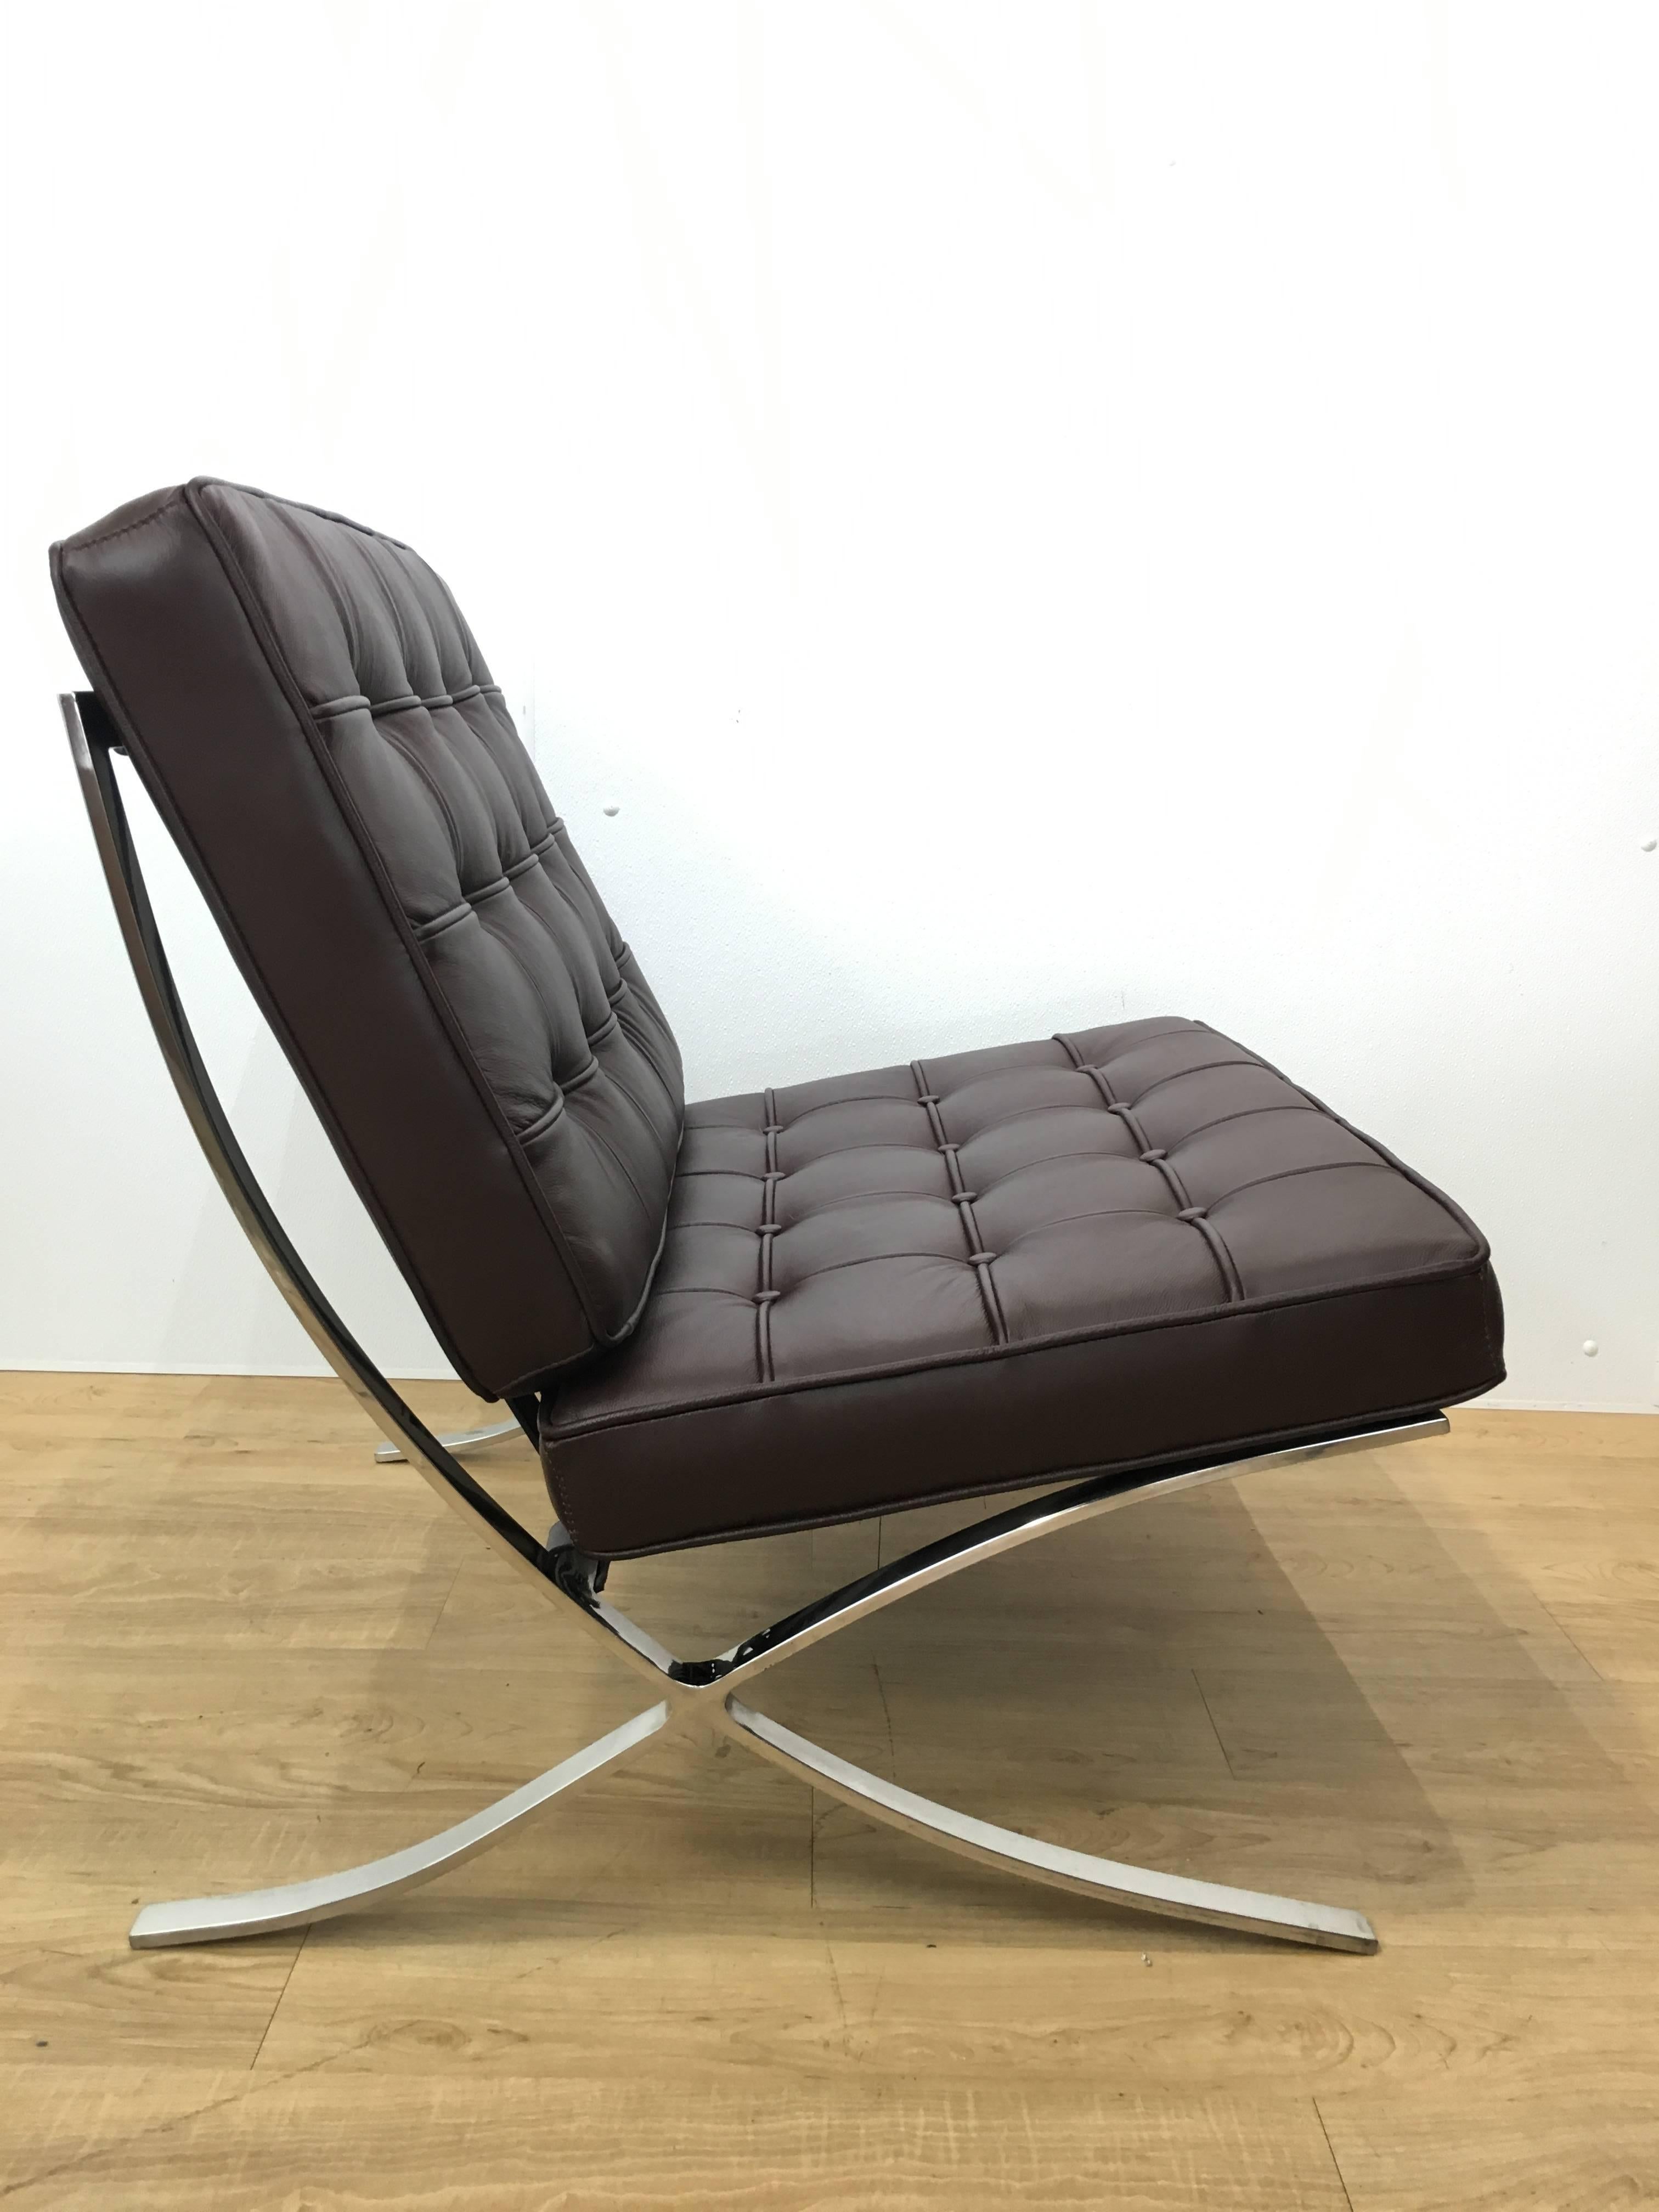 Handsome brown leather Barcelona lounge chair after the iconic  Mies van der Rohe original. A great vintage example. Great quality Italian leather with heavy chrome frame.
																											